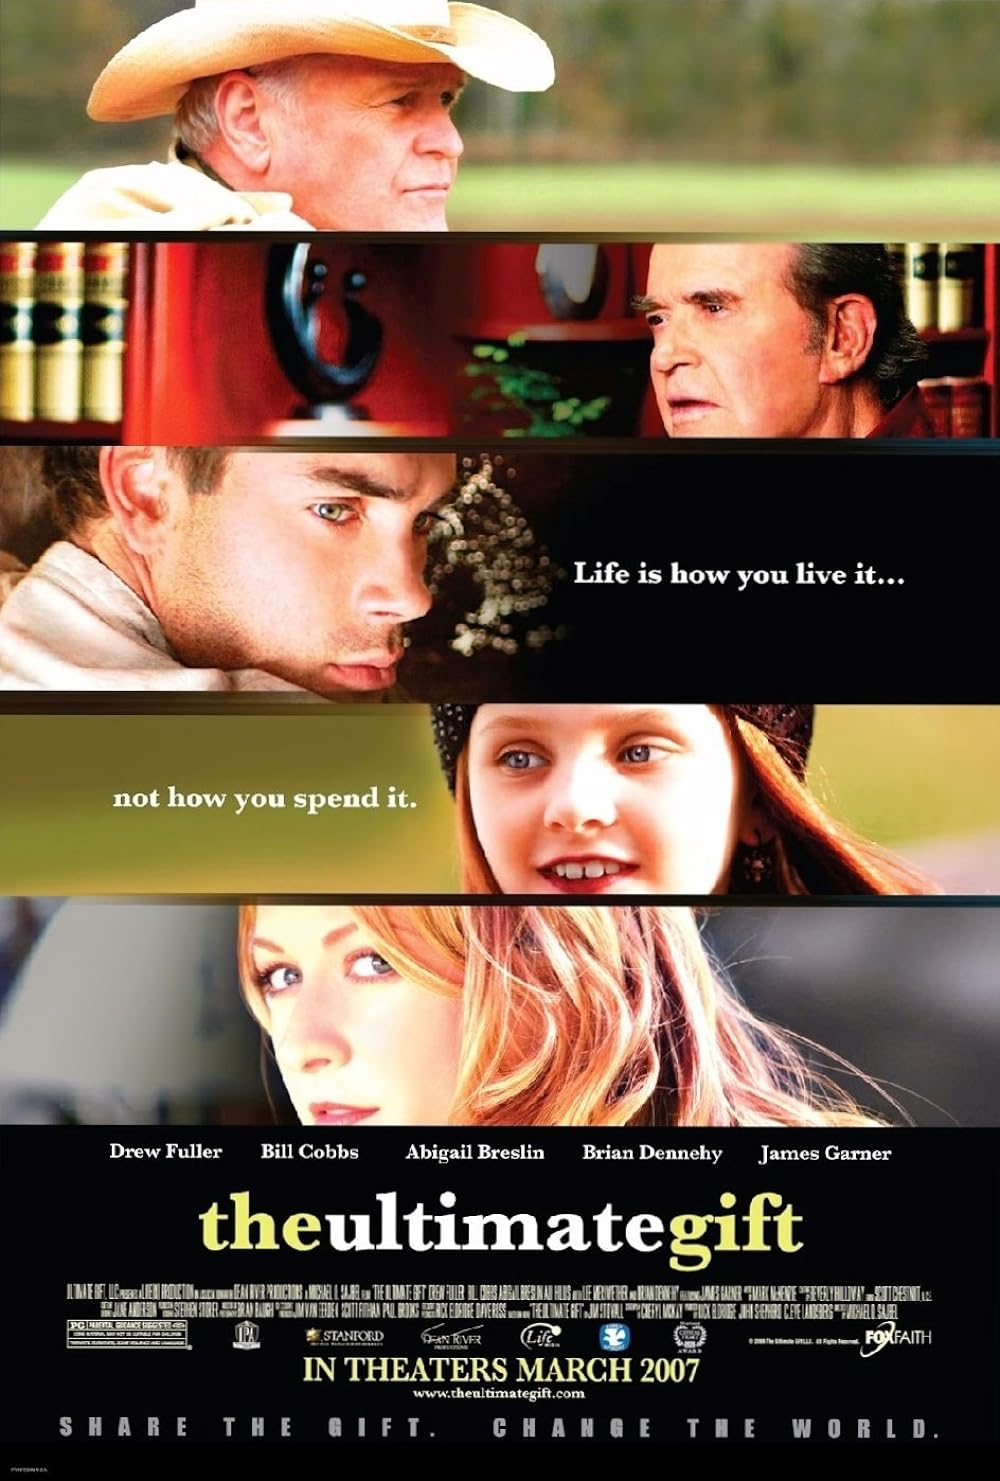 FULL MOVIE: The Ultimate Gift (2006)